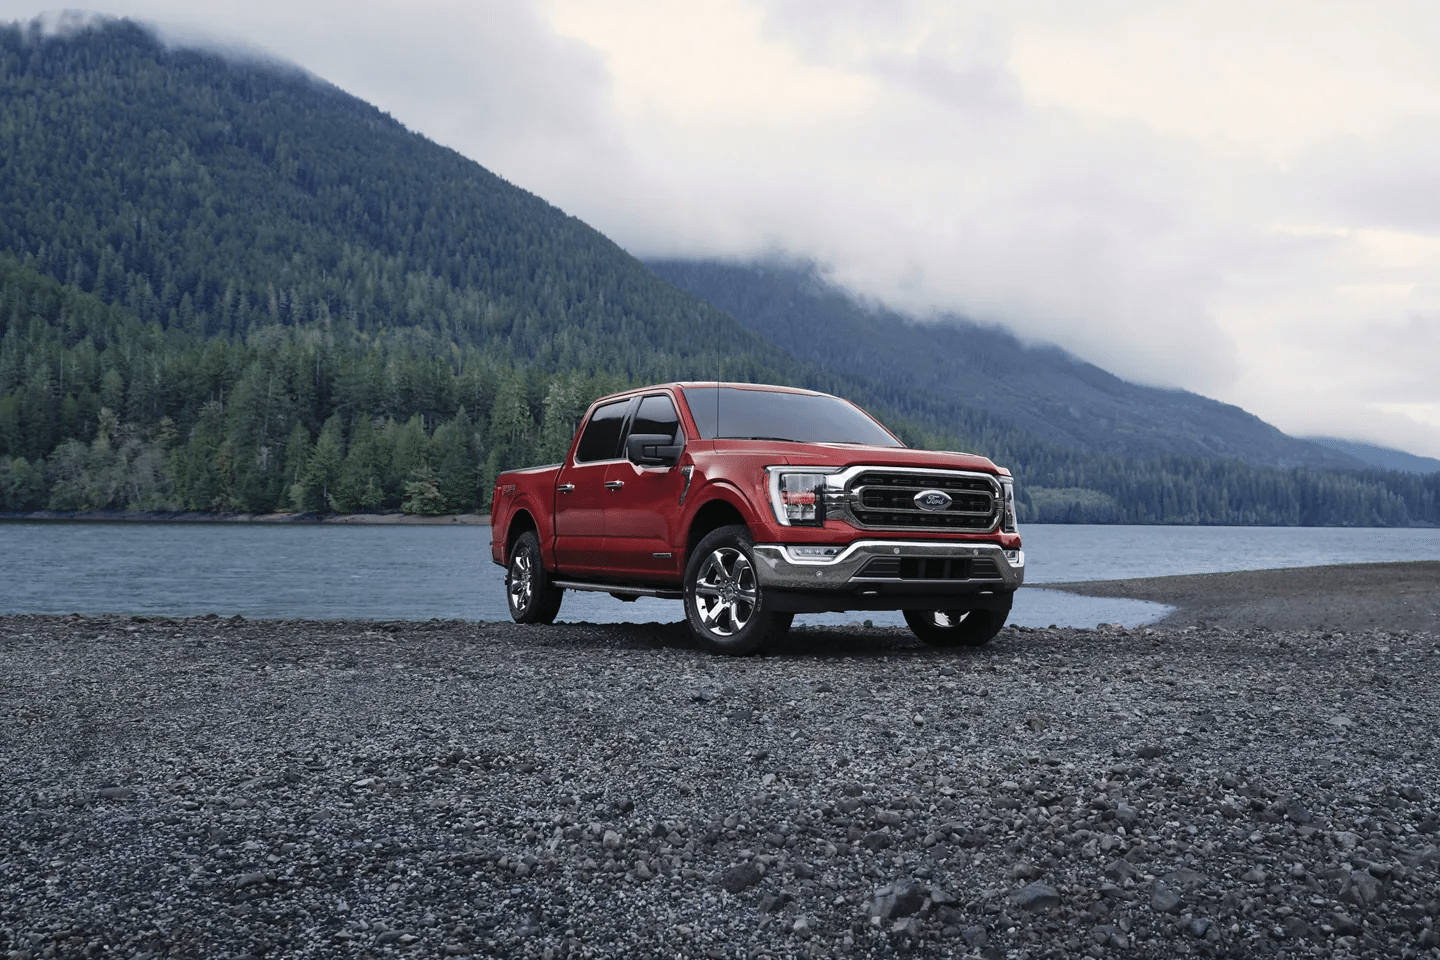 2023 Ford F-150 large selection of available color options